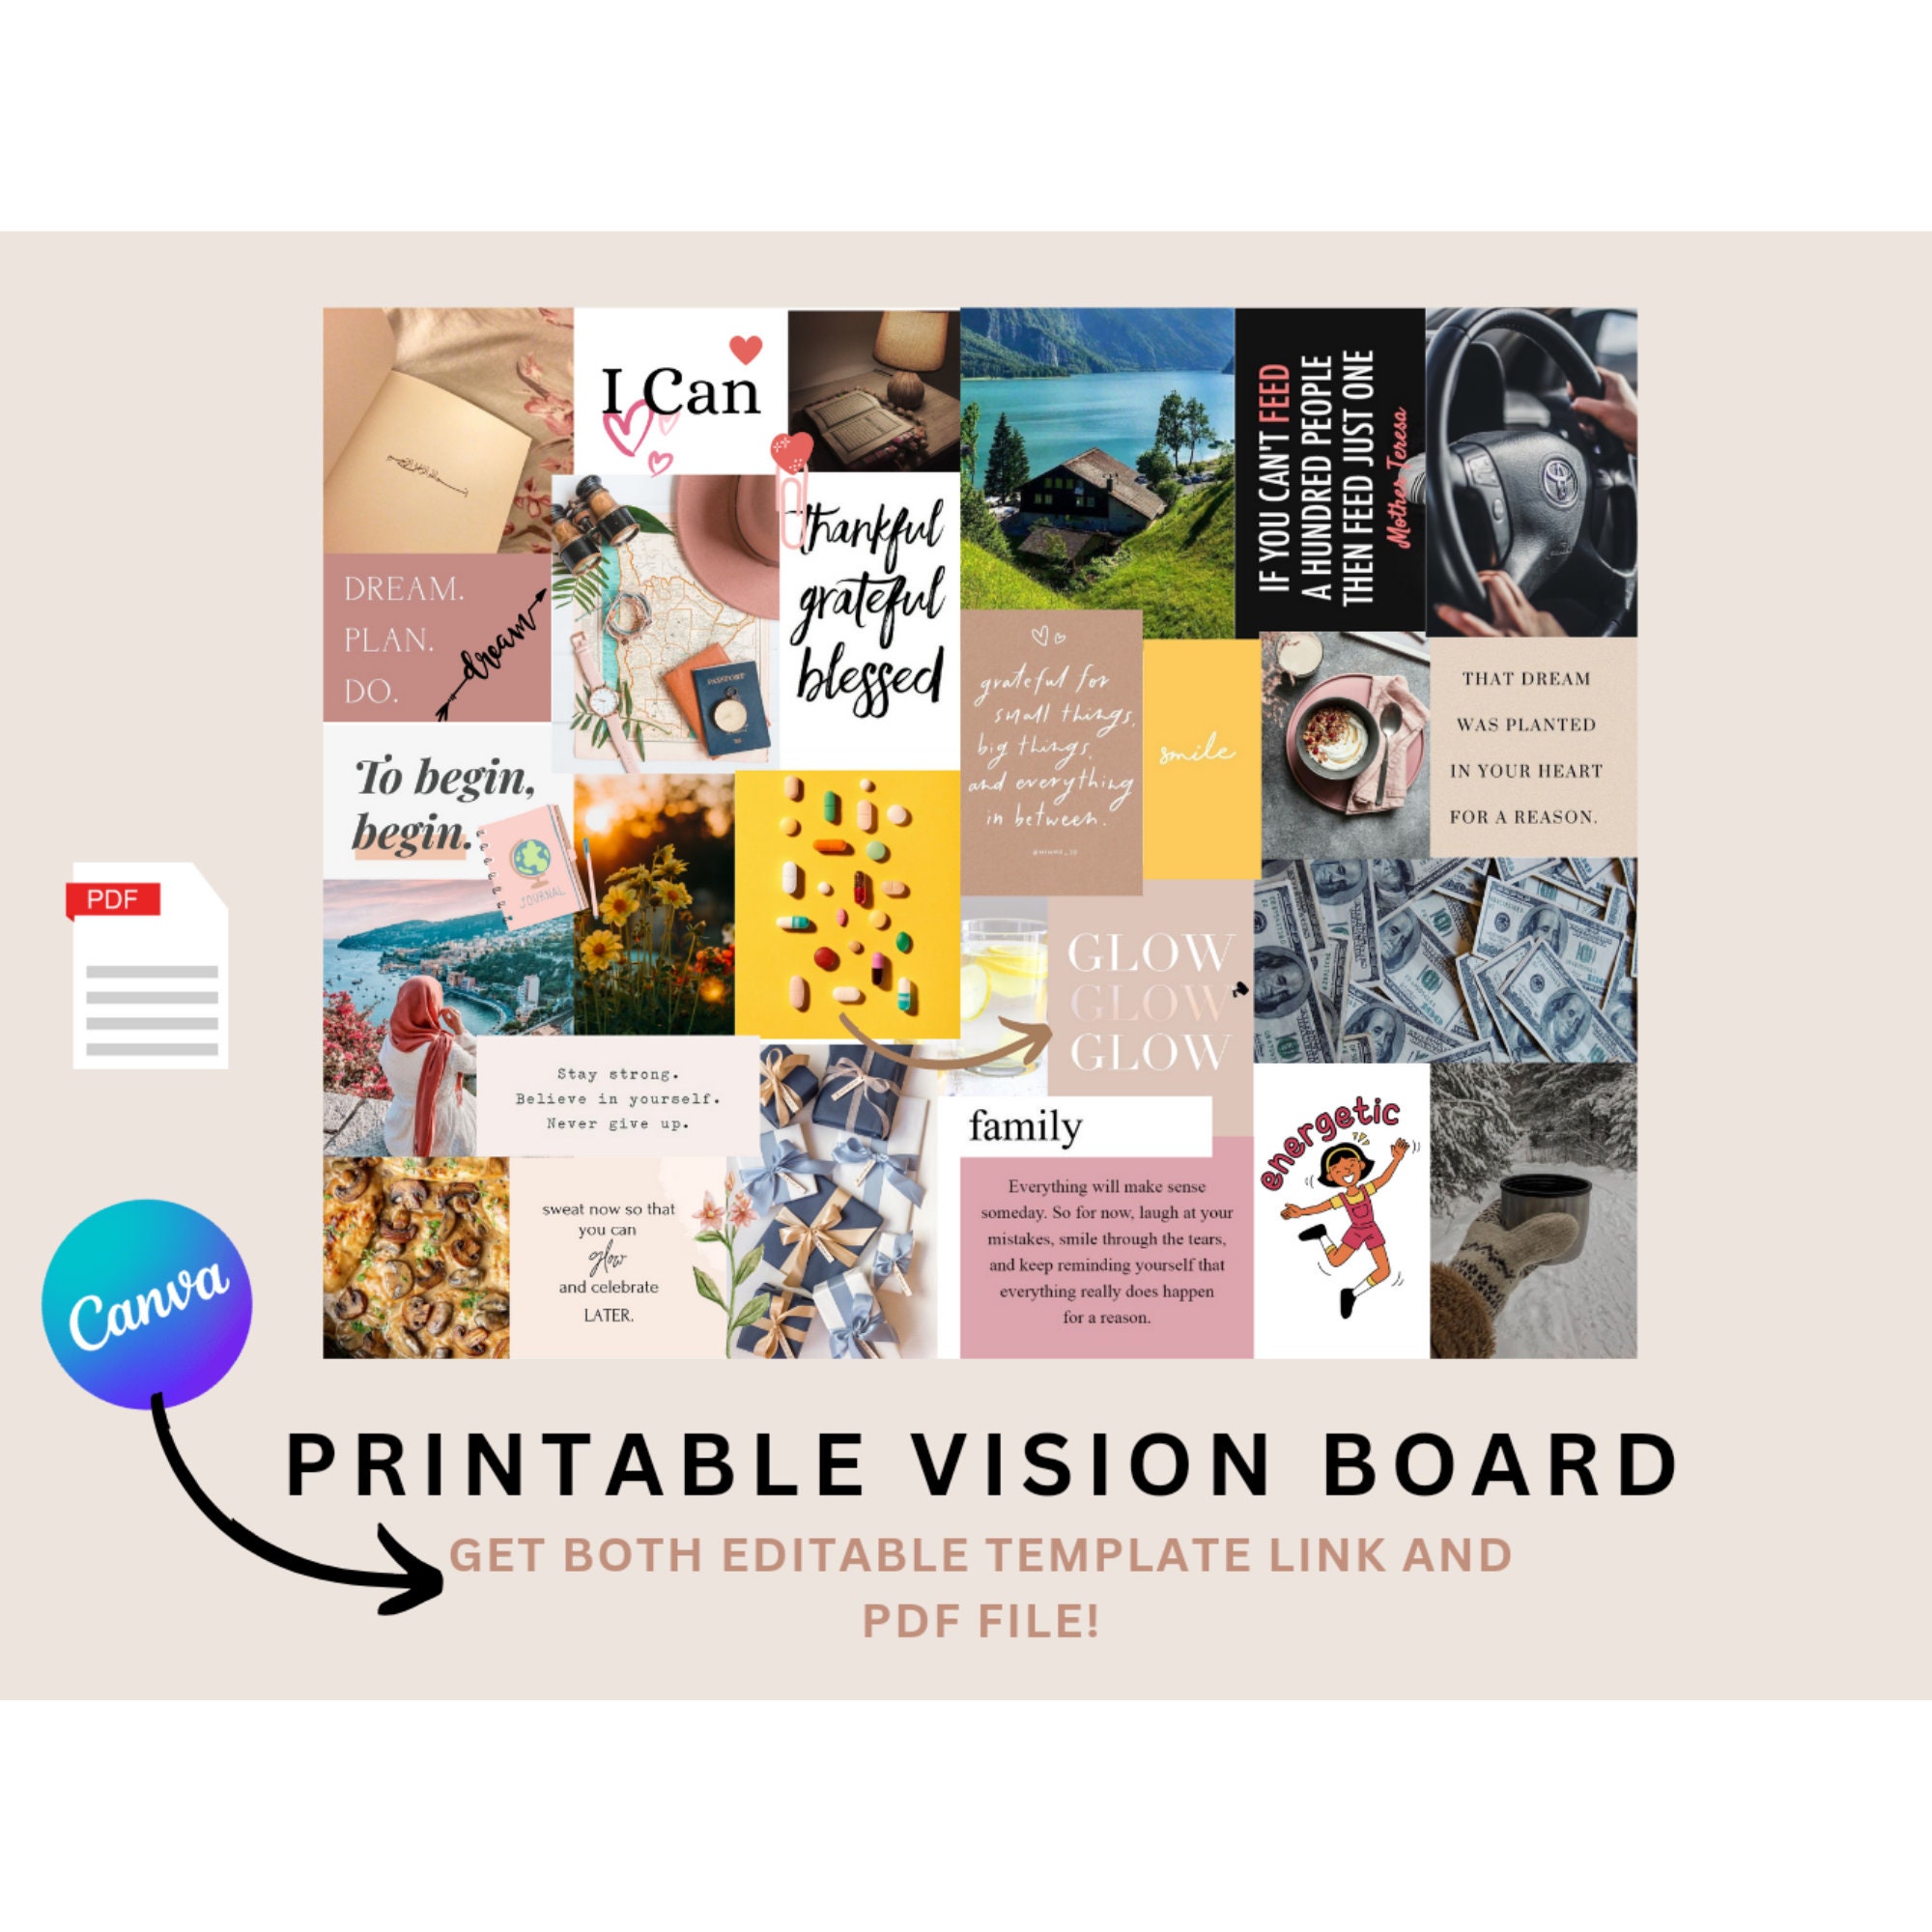 Printable Vision Board With Editable Template Link Dream - Etsy